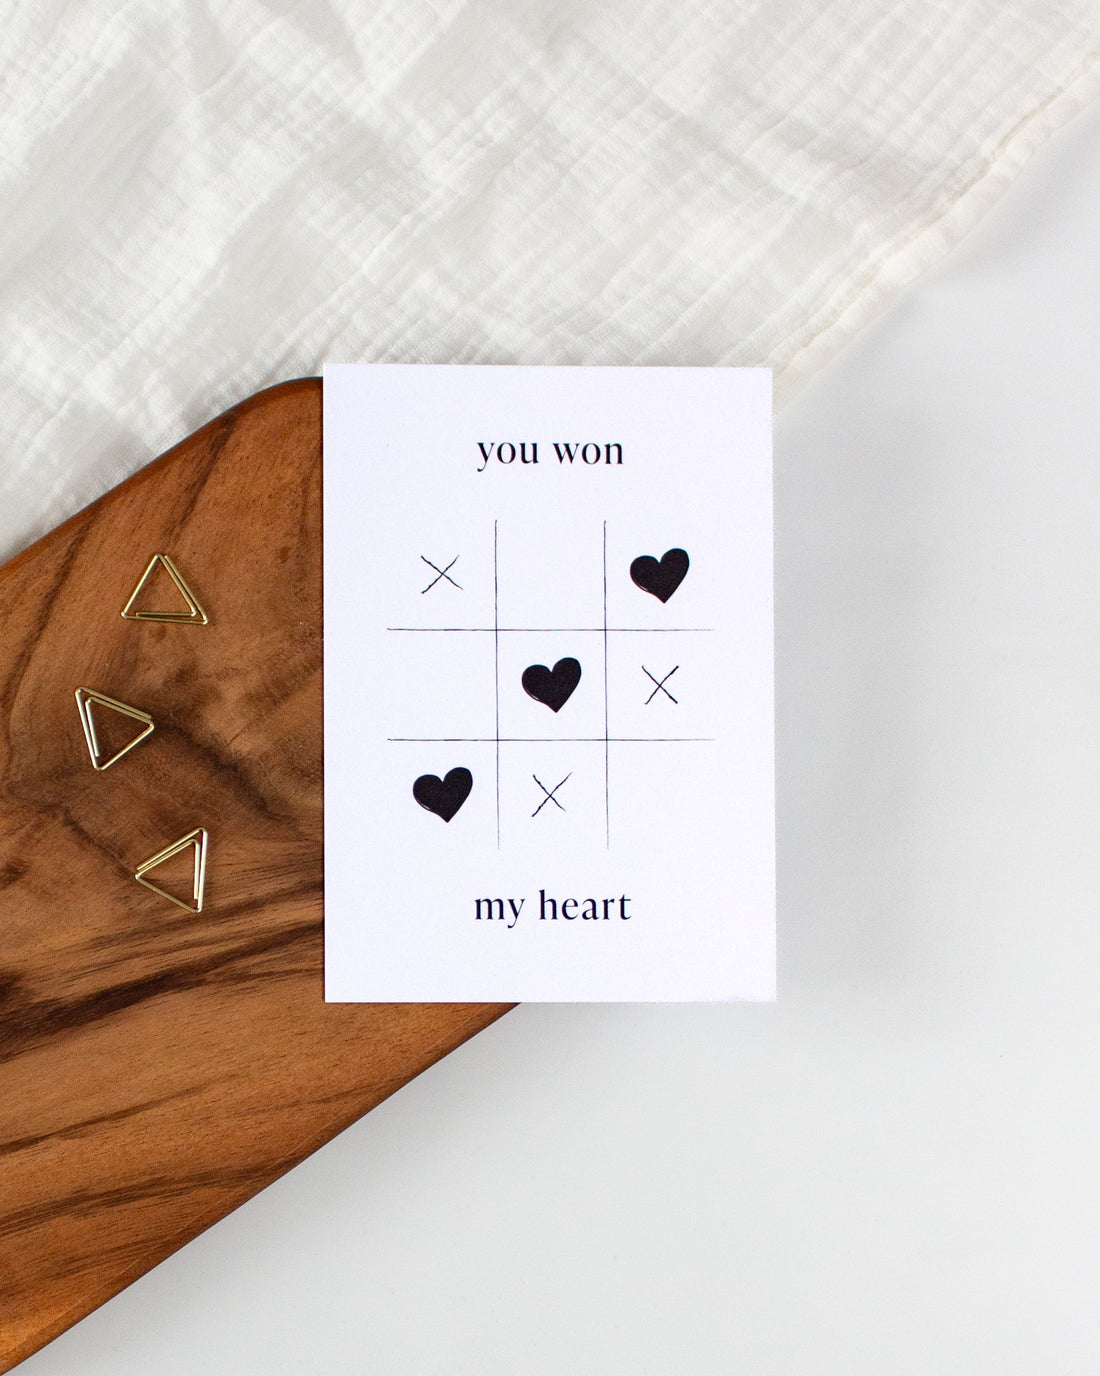 A white postcard laying on a wooden board with some golden triangle paperclips and a white cloth in the background. The postcard design shows a game of tic-tac-toe being won with heart symbols. Text saying &quot;you won my heart&quot; is split up with the first two words being above the game and the rest below it.